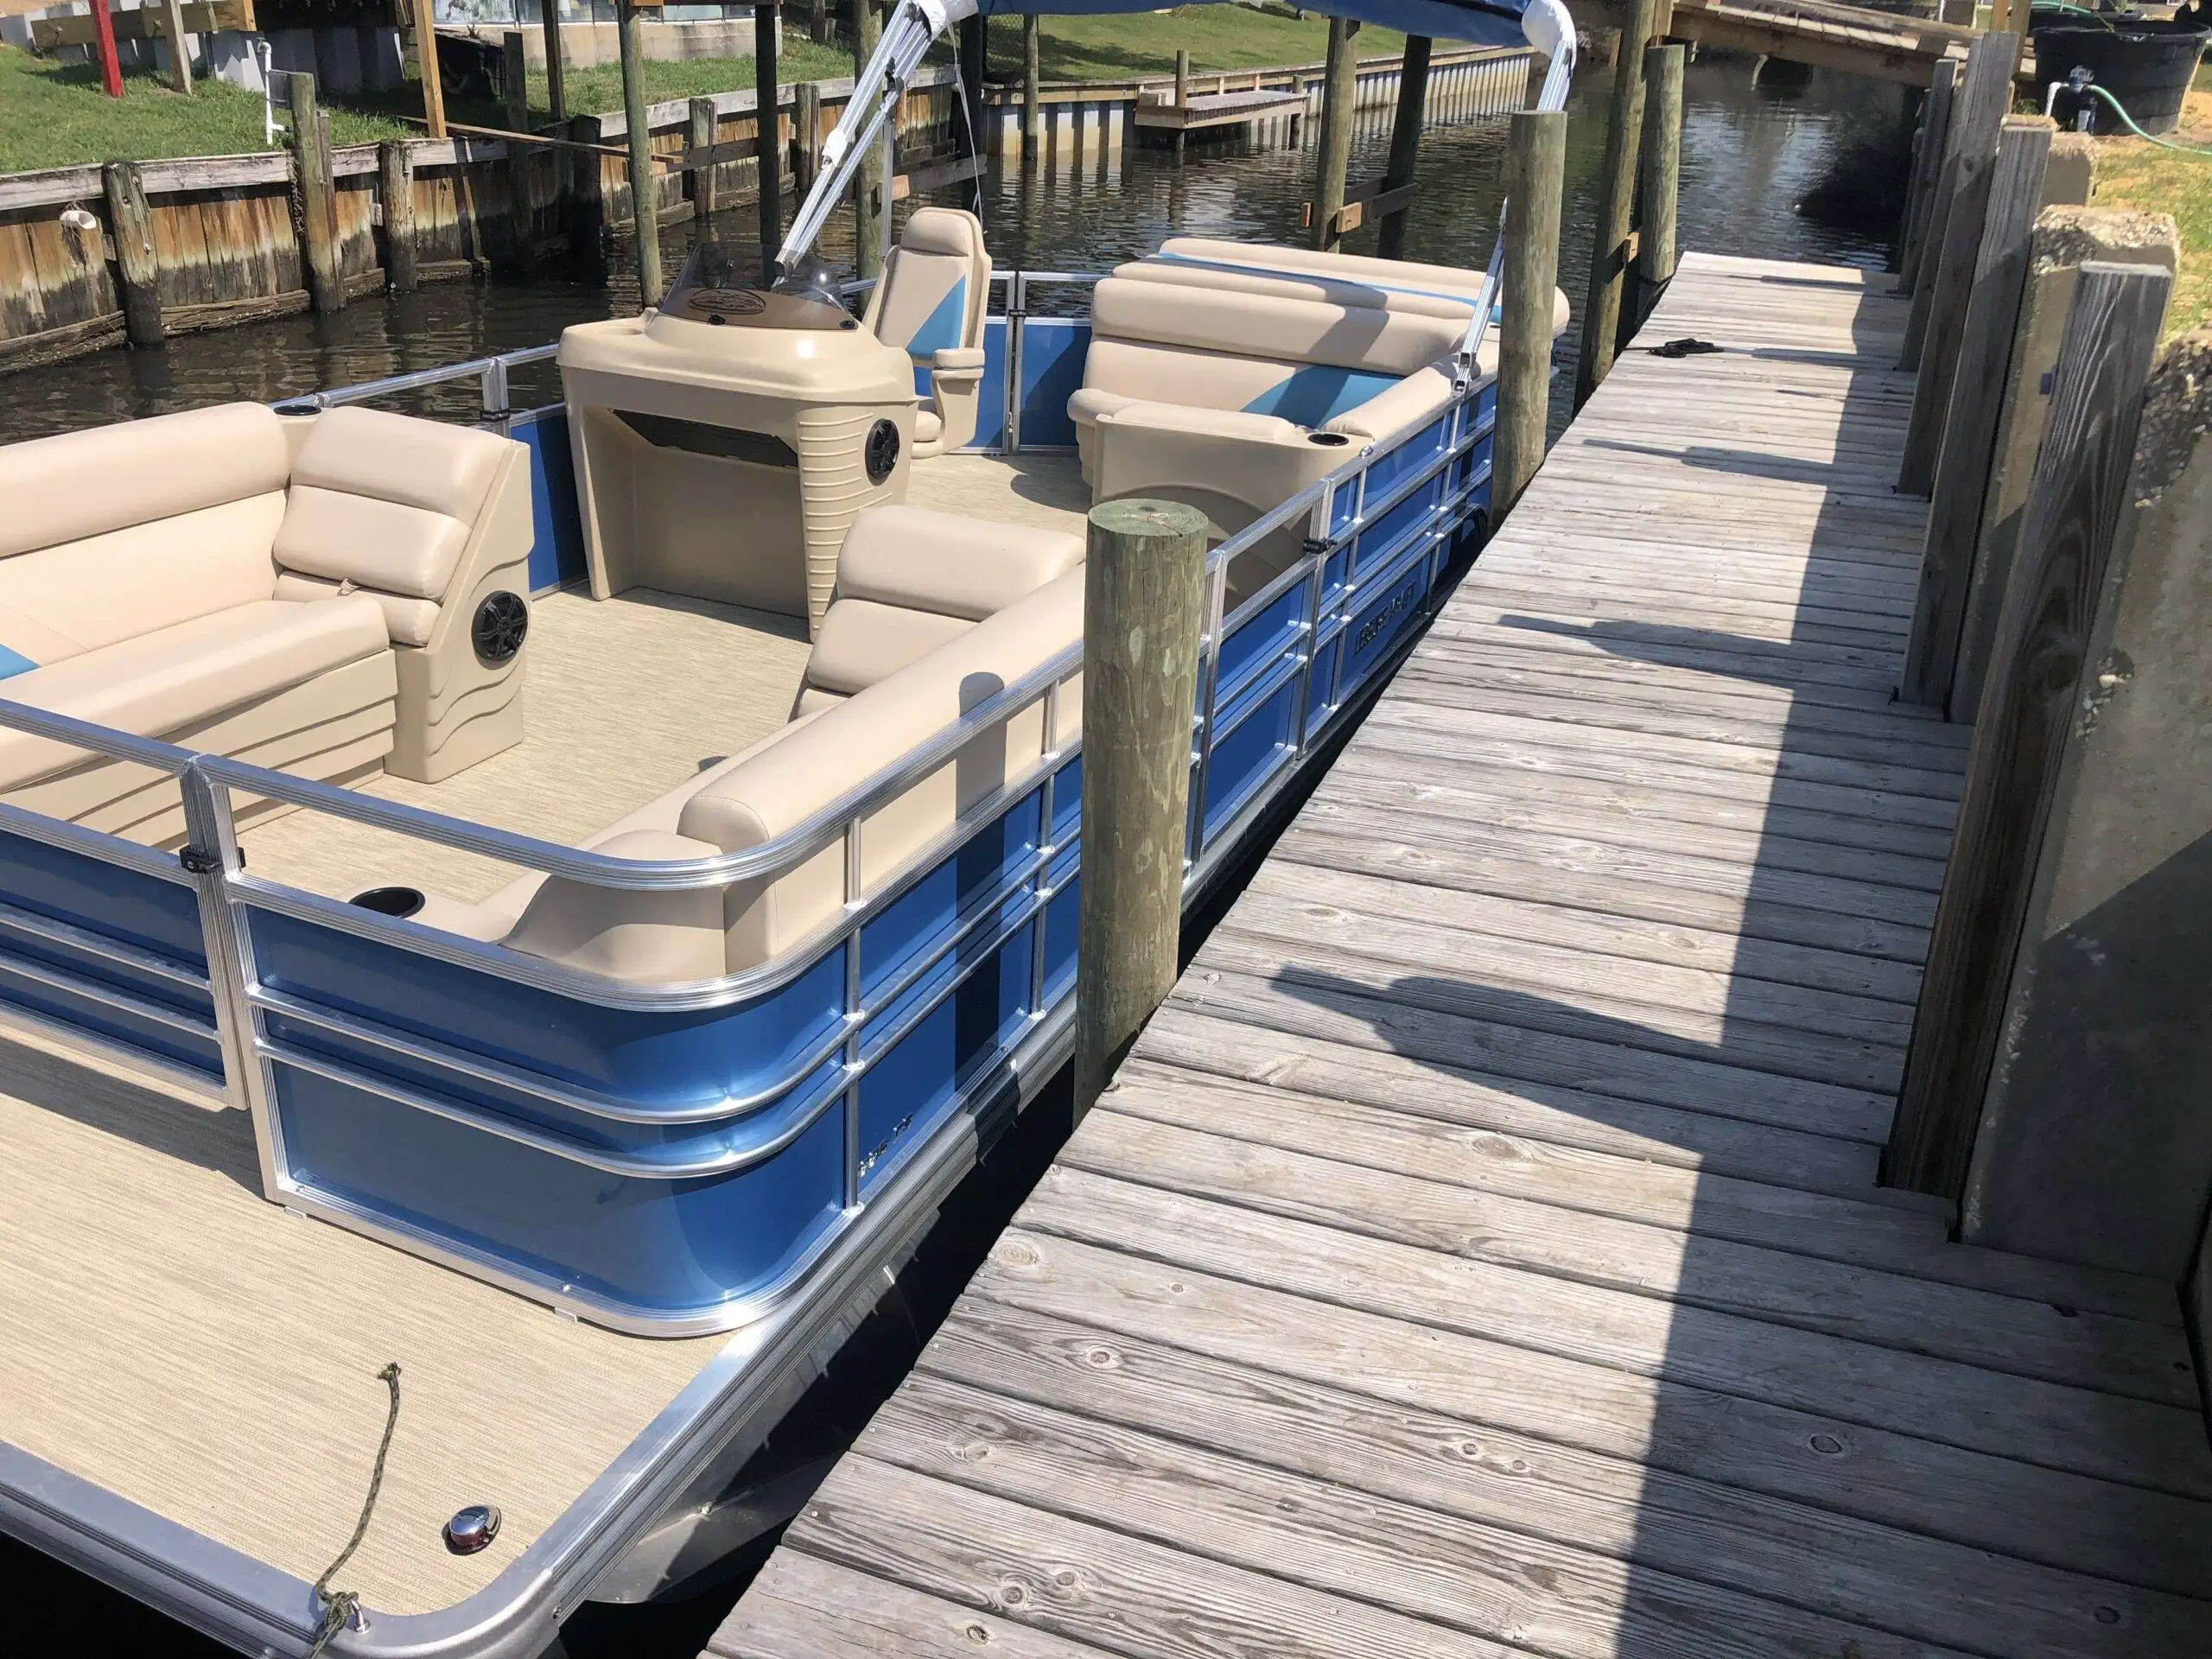 A spacious blue and beige pontoon boat moored at a wooden dock, ready for renting in Panama City.